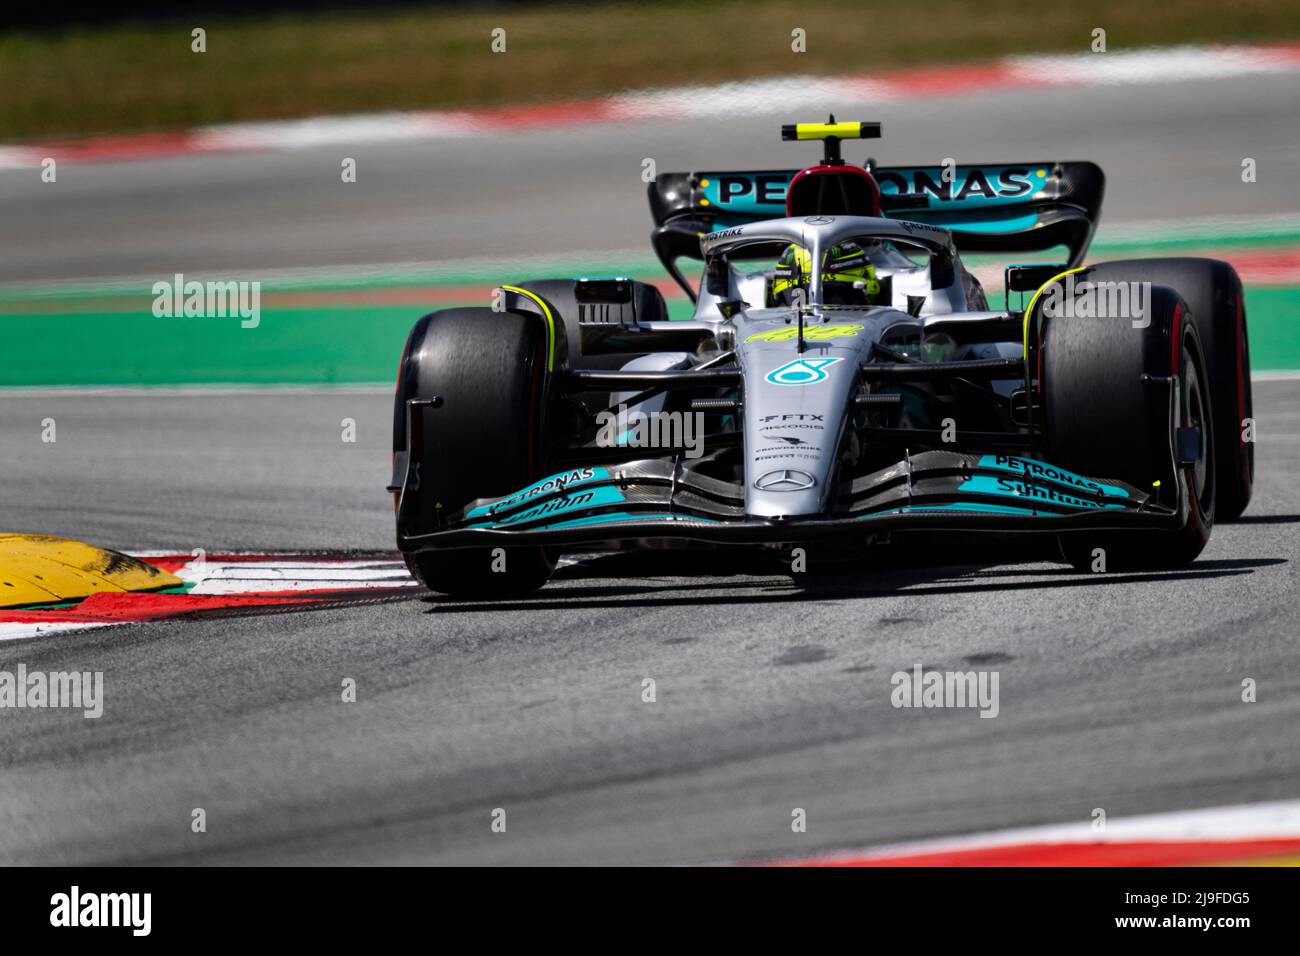 Lewis Hamilton of Great Britain and Mercedes drives his W13 during third practice ahead of the F1 Grand Prix of Spain at Circuit de Barcelona-Catalunya on May 21, 2022 in Barcelona, Spain. Foto: Siu Wu. Stock Photo